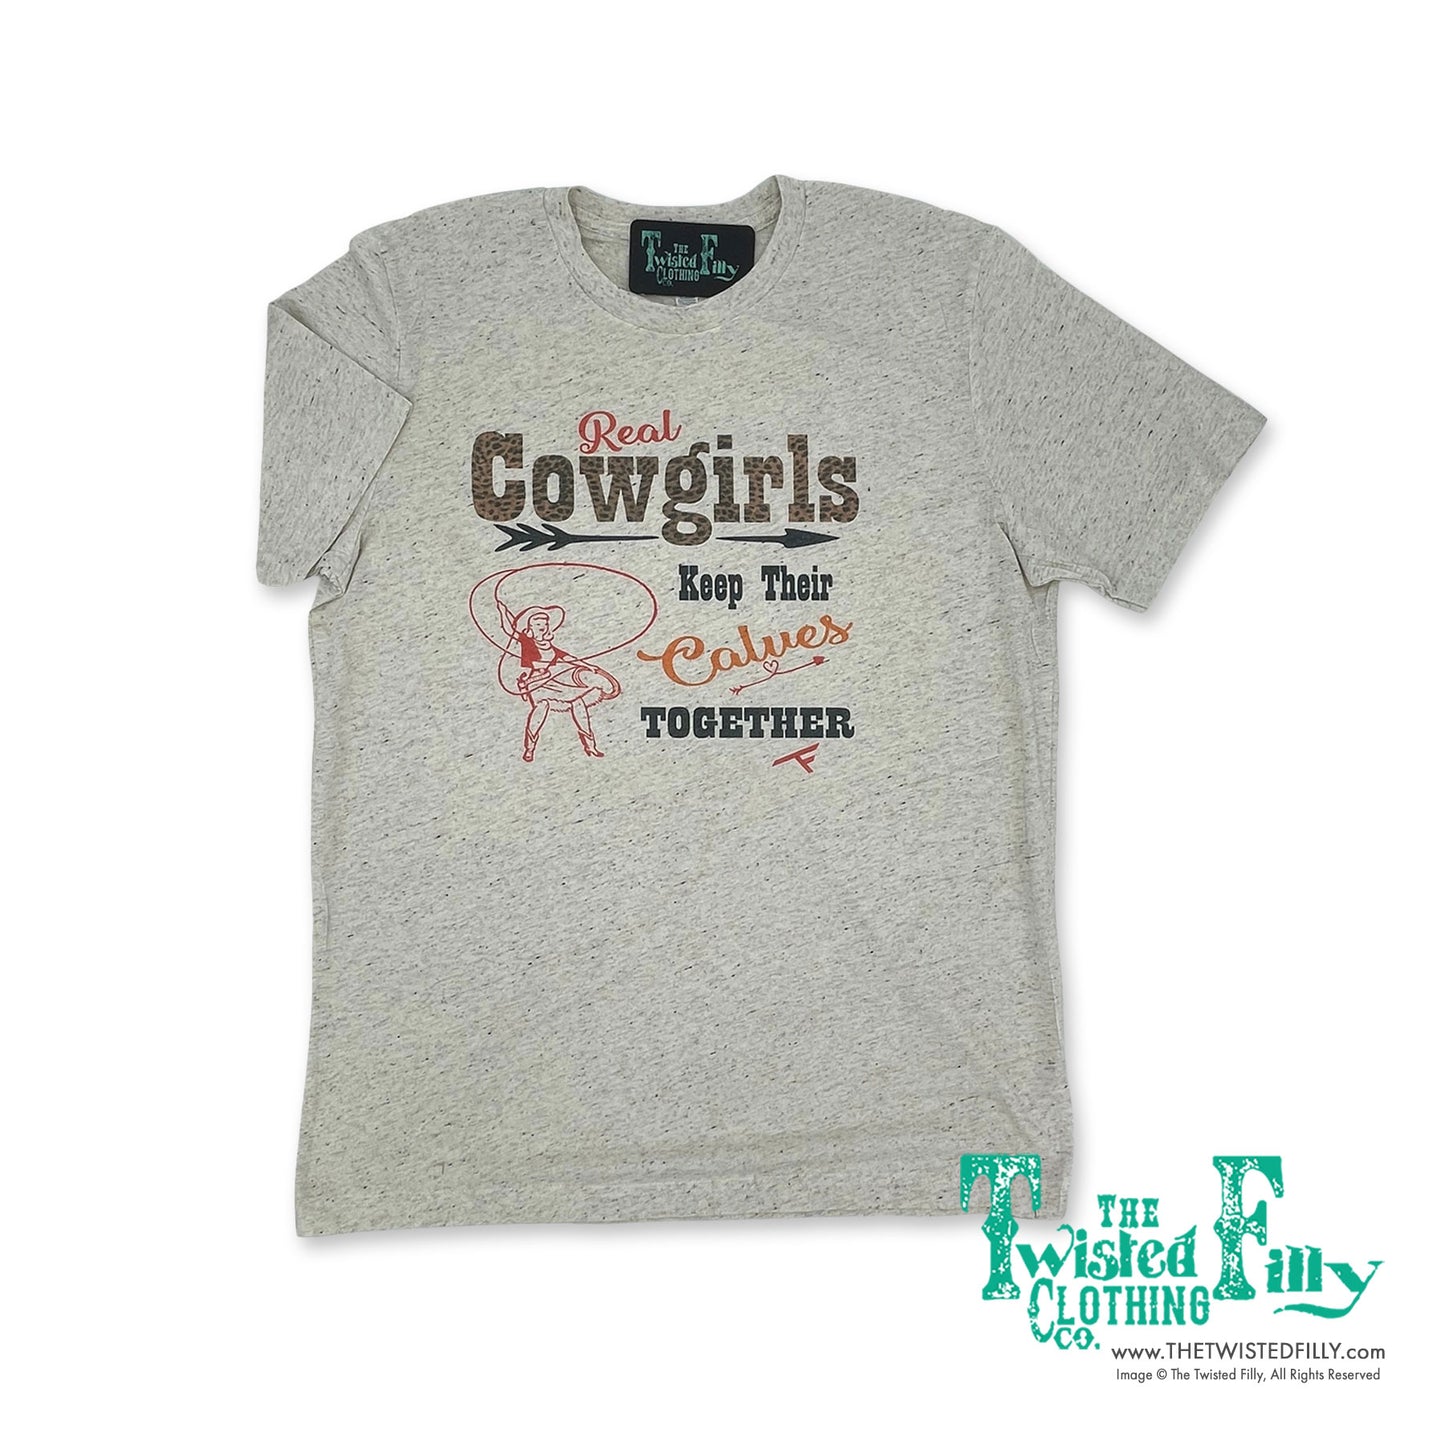 Real Cowgirls Keep Their Calves Together - S/S Women's Adult Tee - Oatmeal